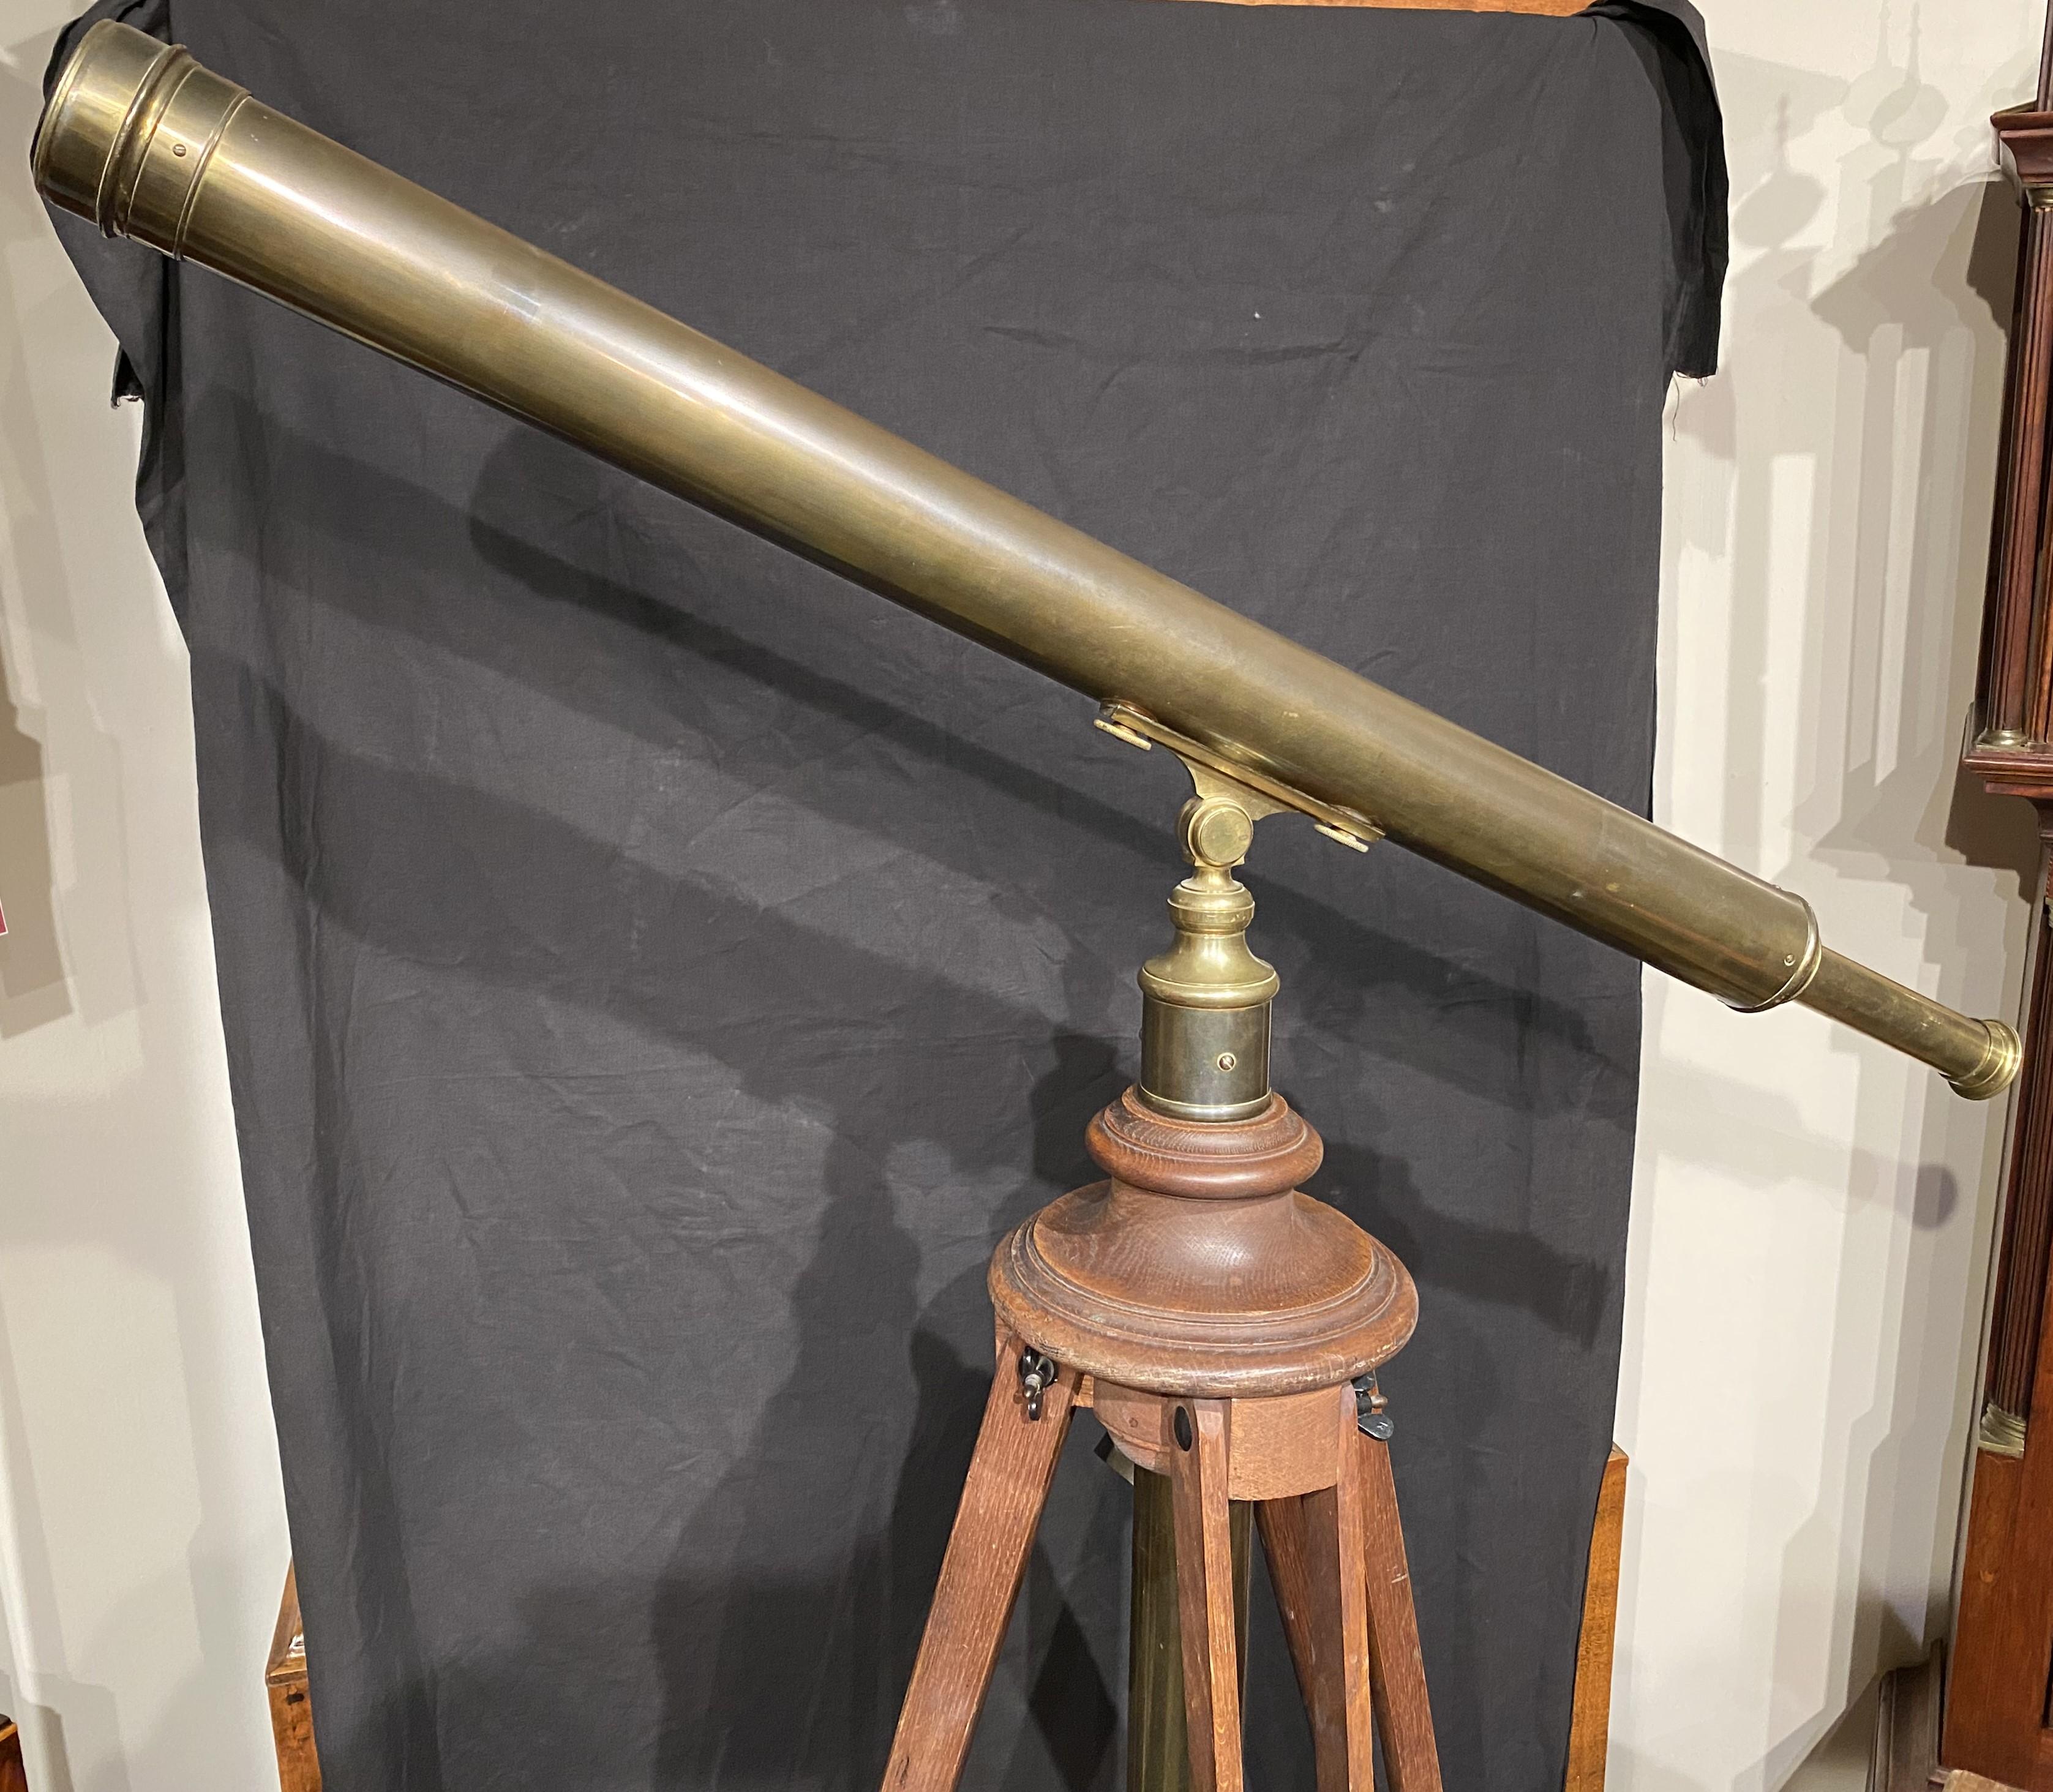 A fine antique brass telescope, stamped Andrew J. Lloyd Company, a Boston, MA retailer active 1850-1875. Brass tubes and fittings, includes the original collapsible wooden tripod stand and the original wooden dovetailed travel case. Good working